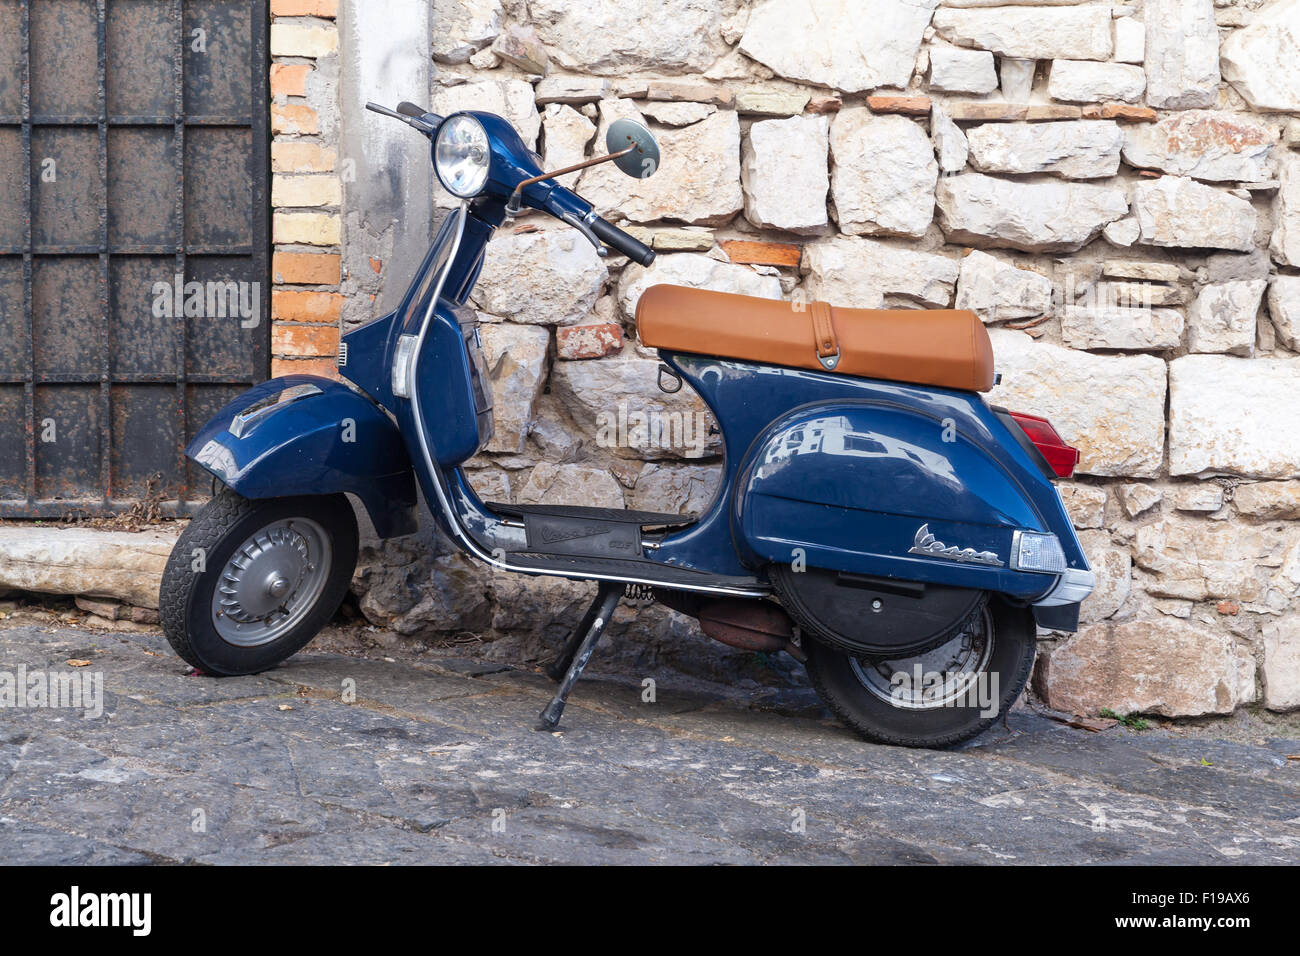 Gaeta, Italy - August 19, 2015: Classic blue Vespa PX 150 scooter ...